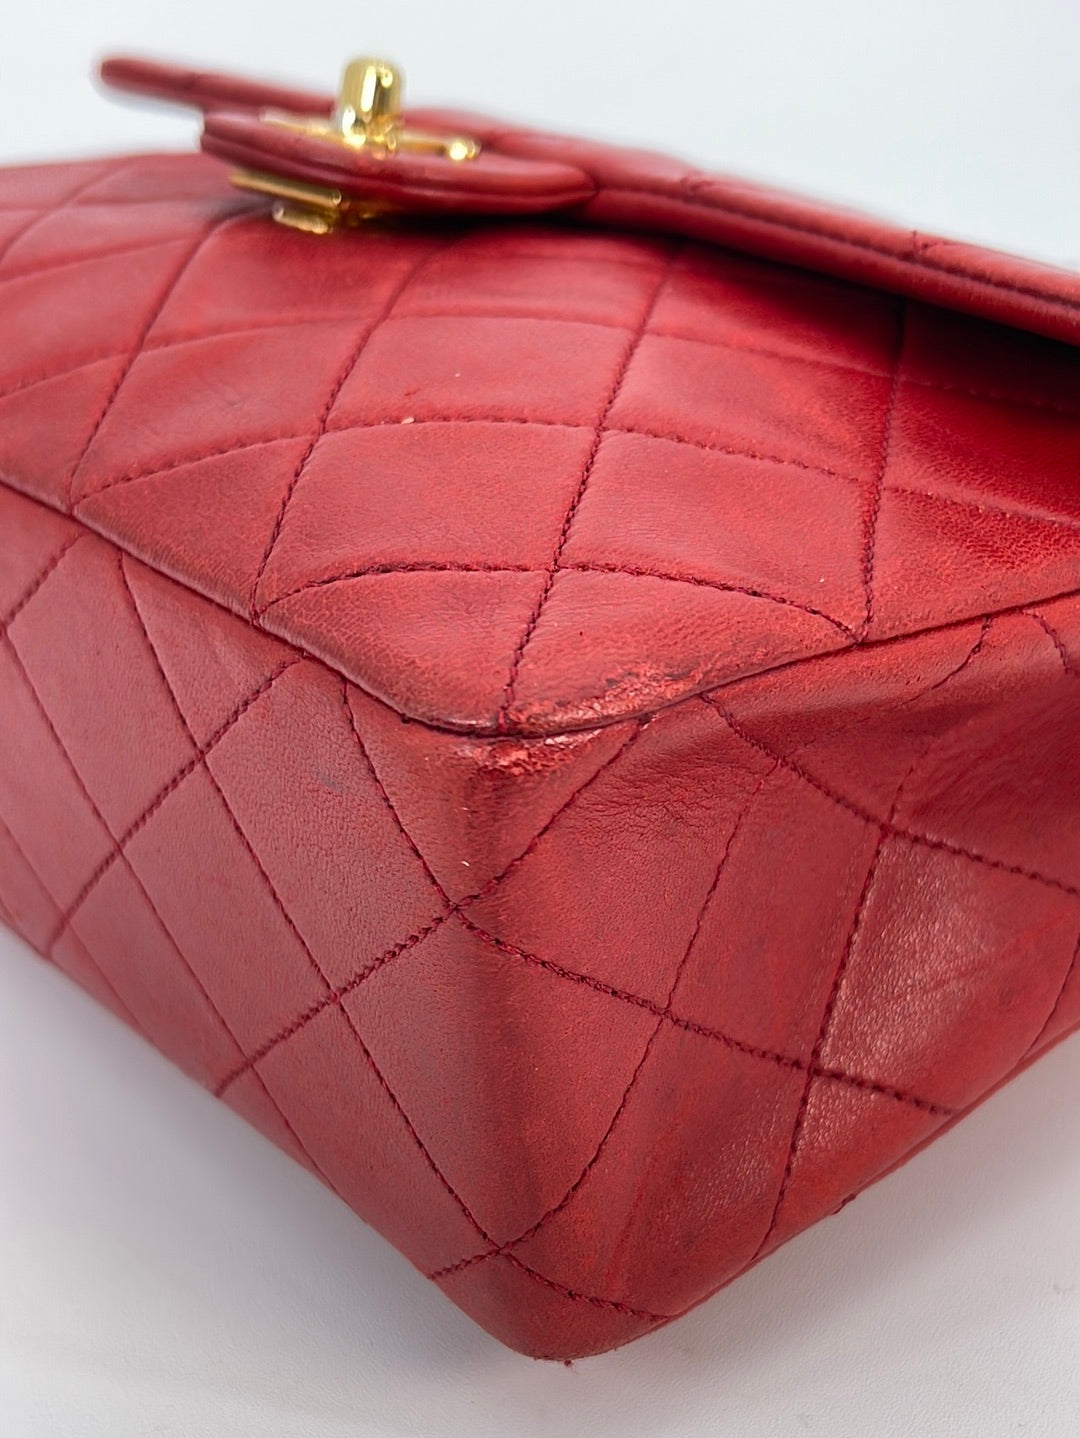 Vintage Rare CHANEL Red Lambskin Small Single Flap Square Bag 1279188 040123 *** LIVE SALE *** - $1380 OFF